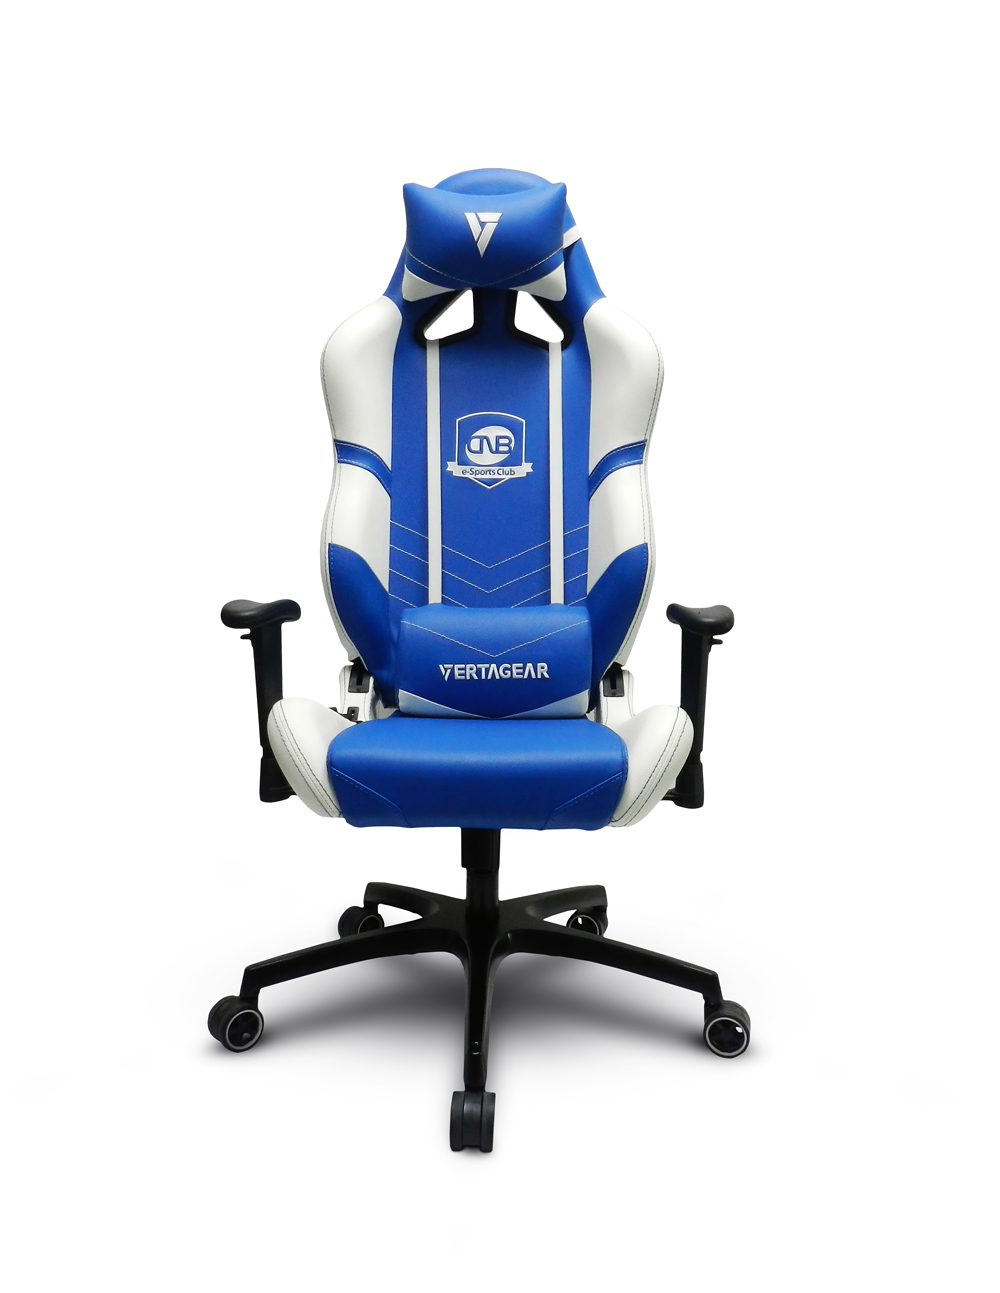 cnb esports edition vertagear racing series sline sl2000 gaming chairs   150kg weight limit  easy assembly  adjustable seat height  penta rs1